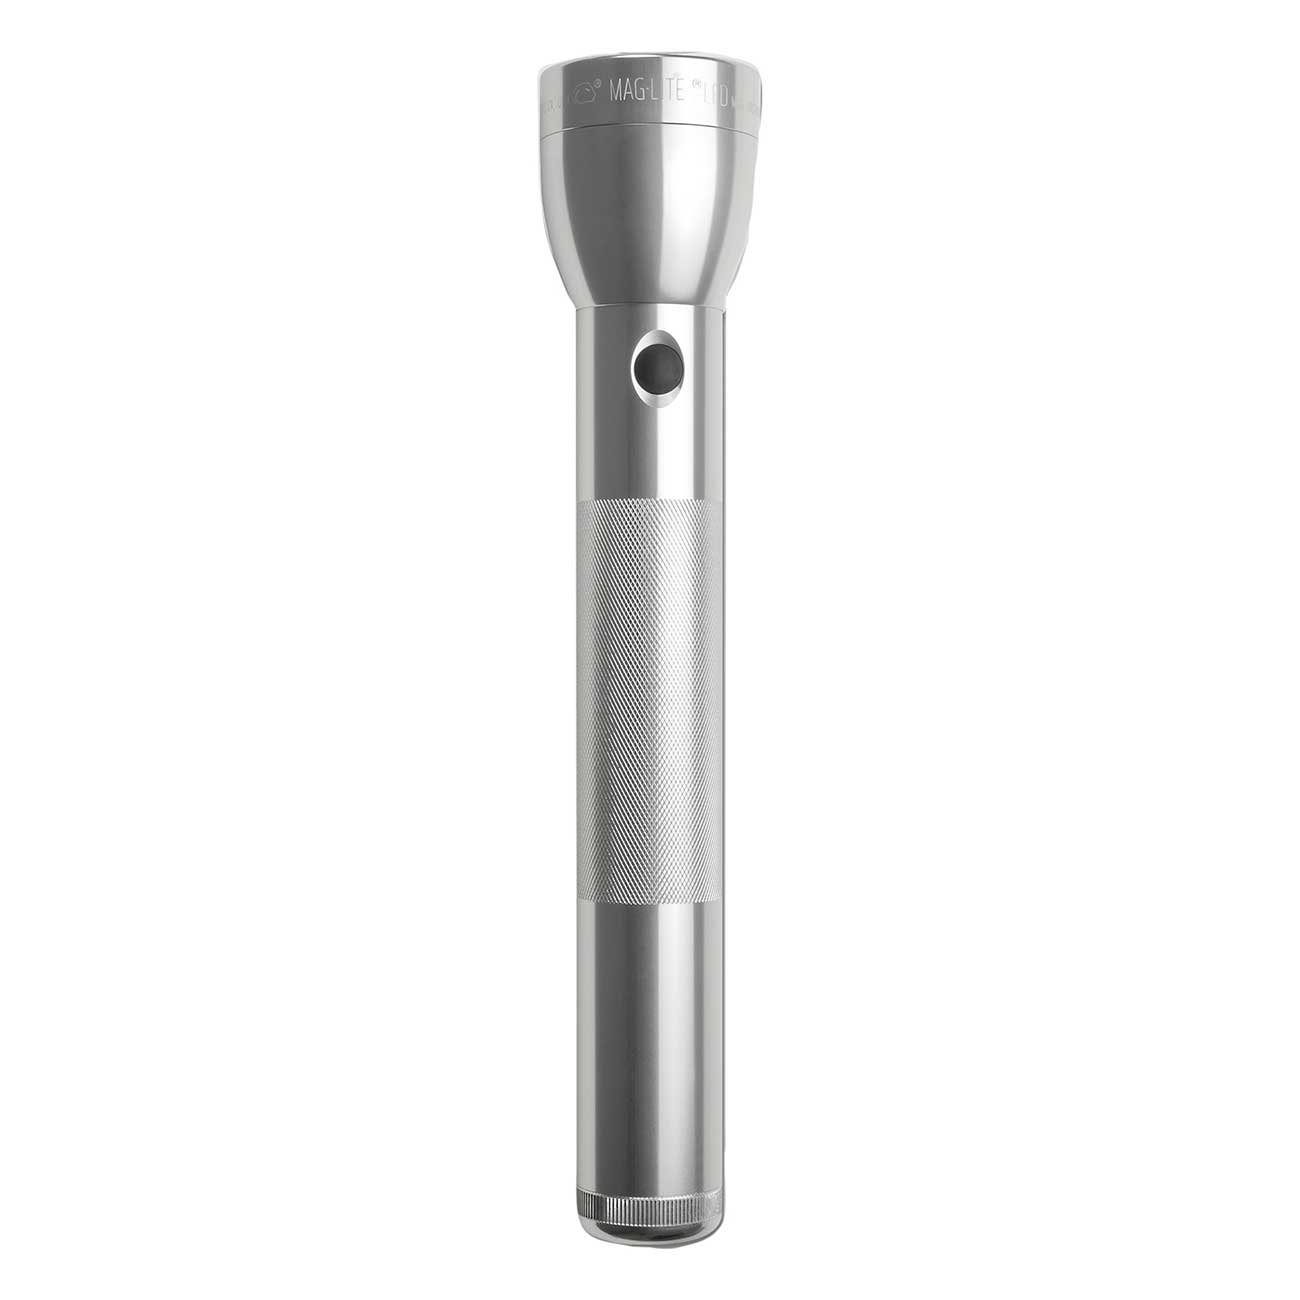 MAGLITE LED 3-Cell D Flashlight Silver (Gift Box)